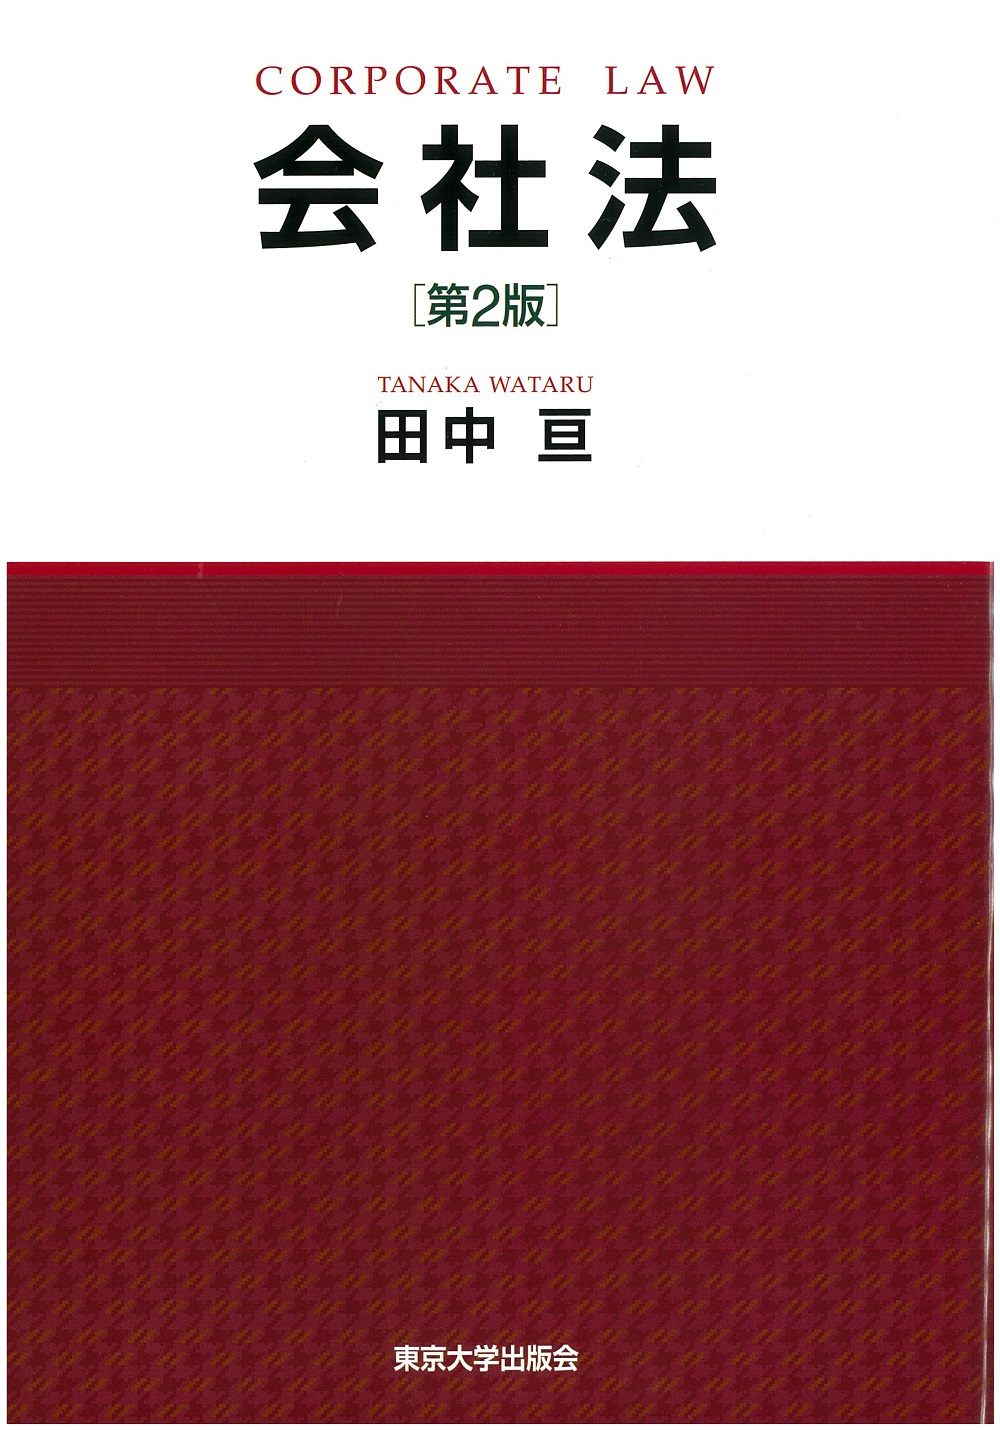 A white and burgundy color (in bottom) cover